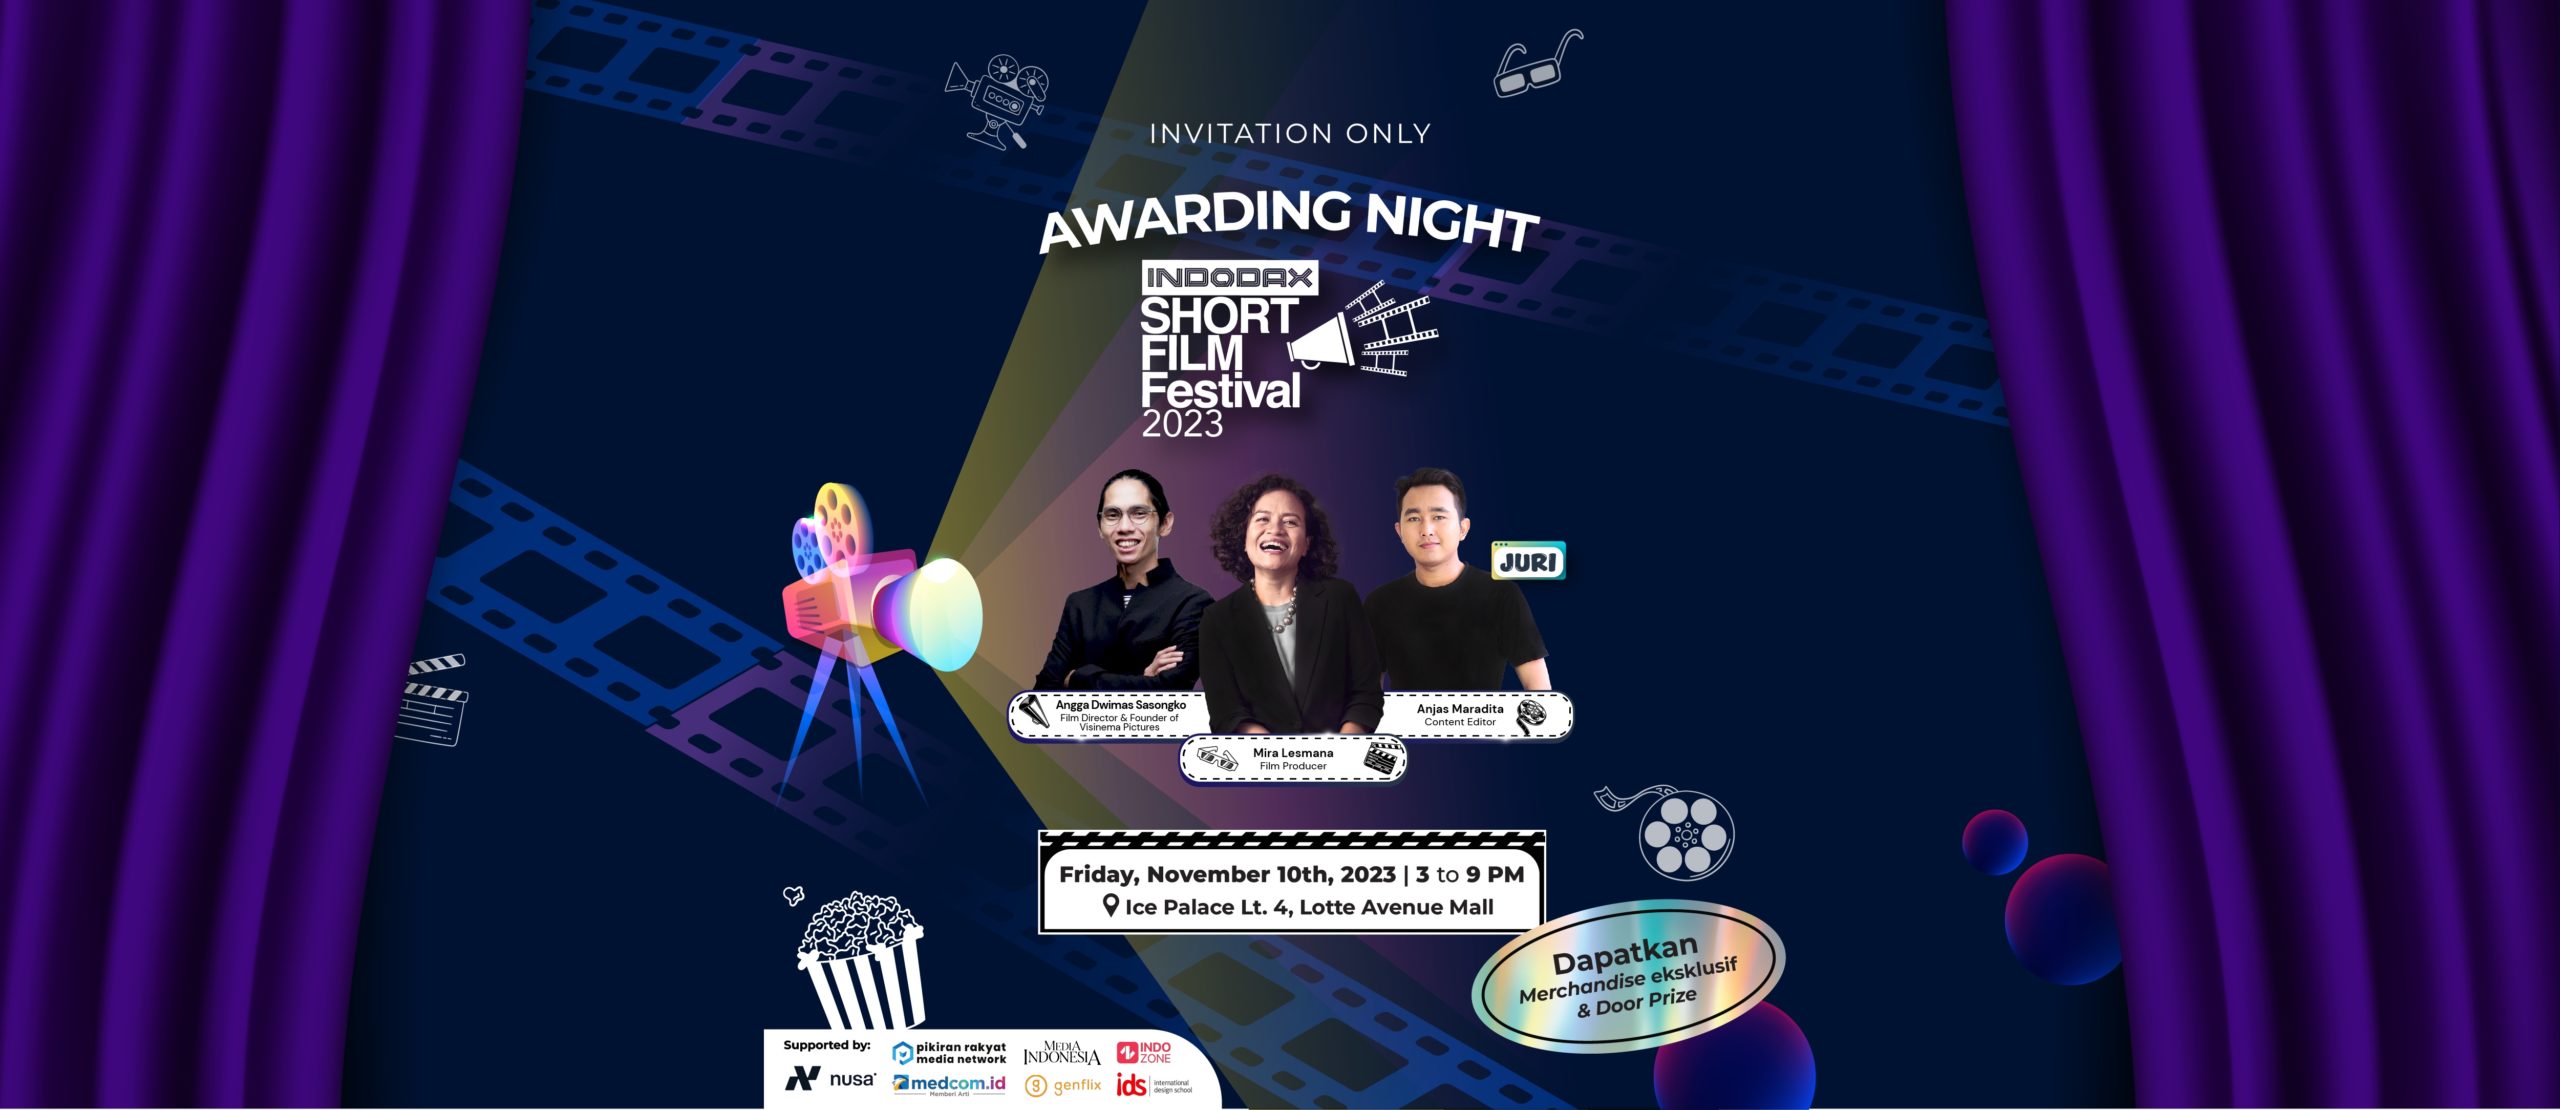 Invitation Only for Awarding Night ISFF 2023